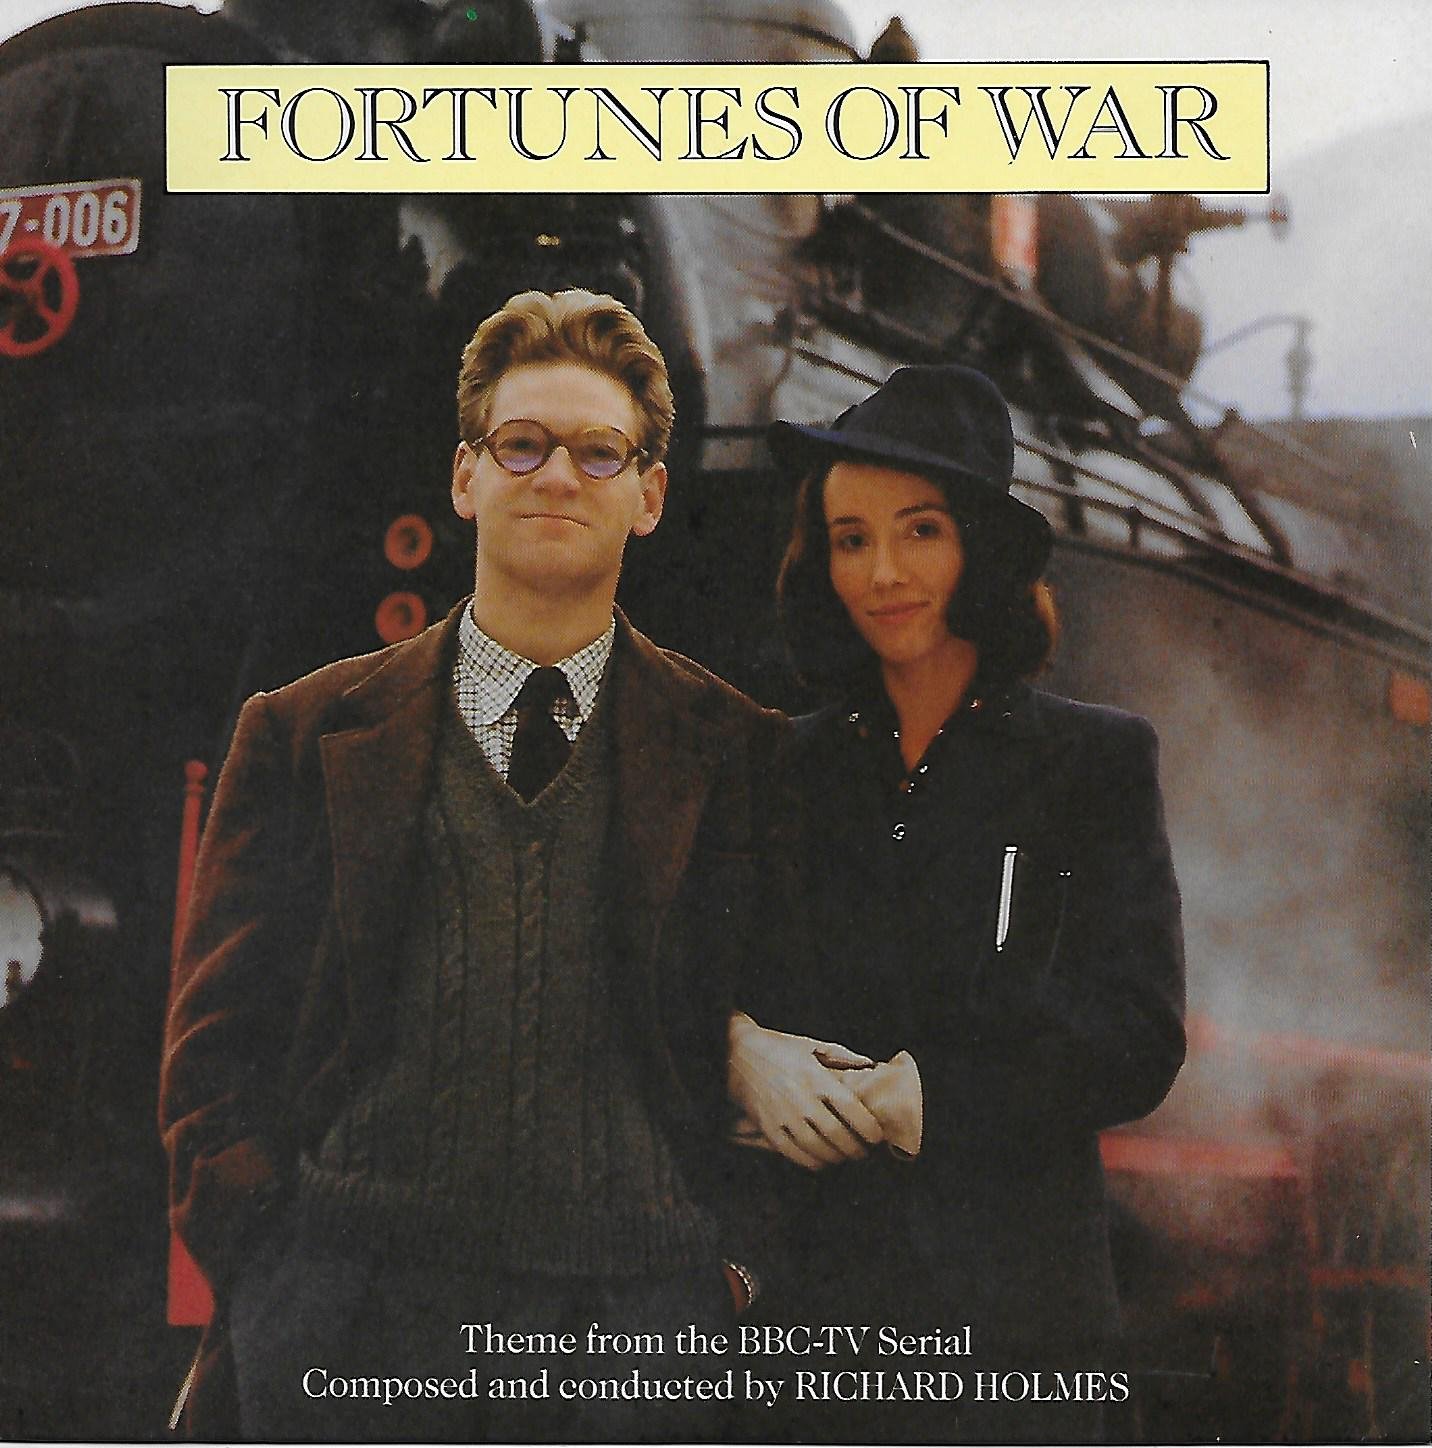 Picture of RESL 221 Fortunes of war single by artist Pavel's Rumanian Ensemble / The United Kingdom Symphony Orchestra from the BBC records and Tapes library